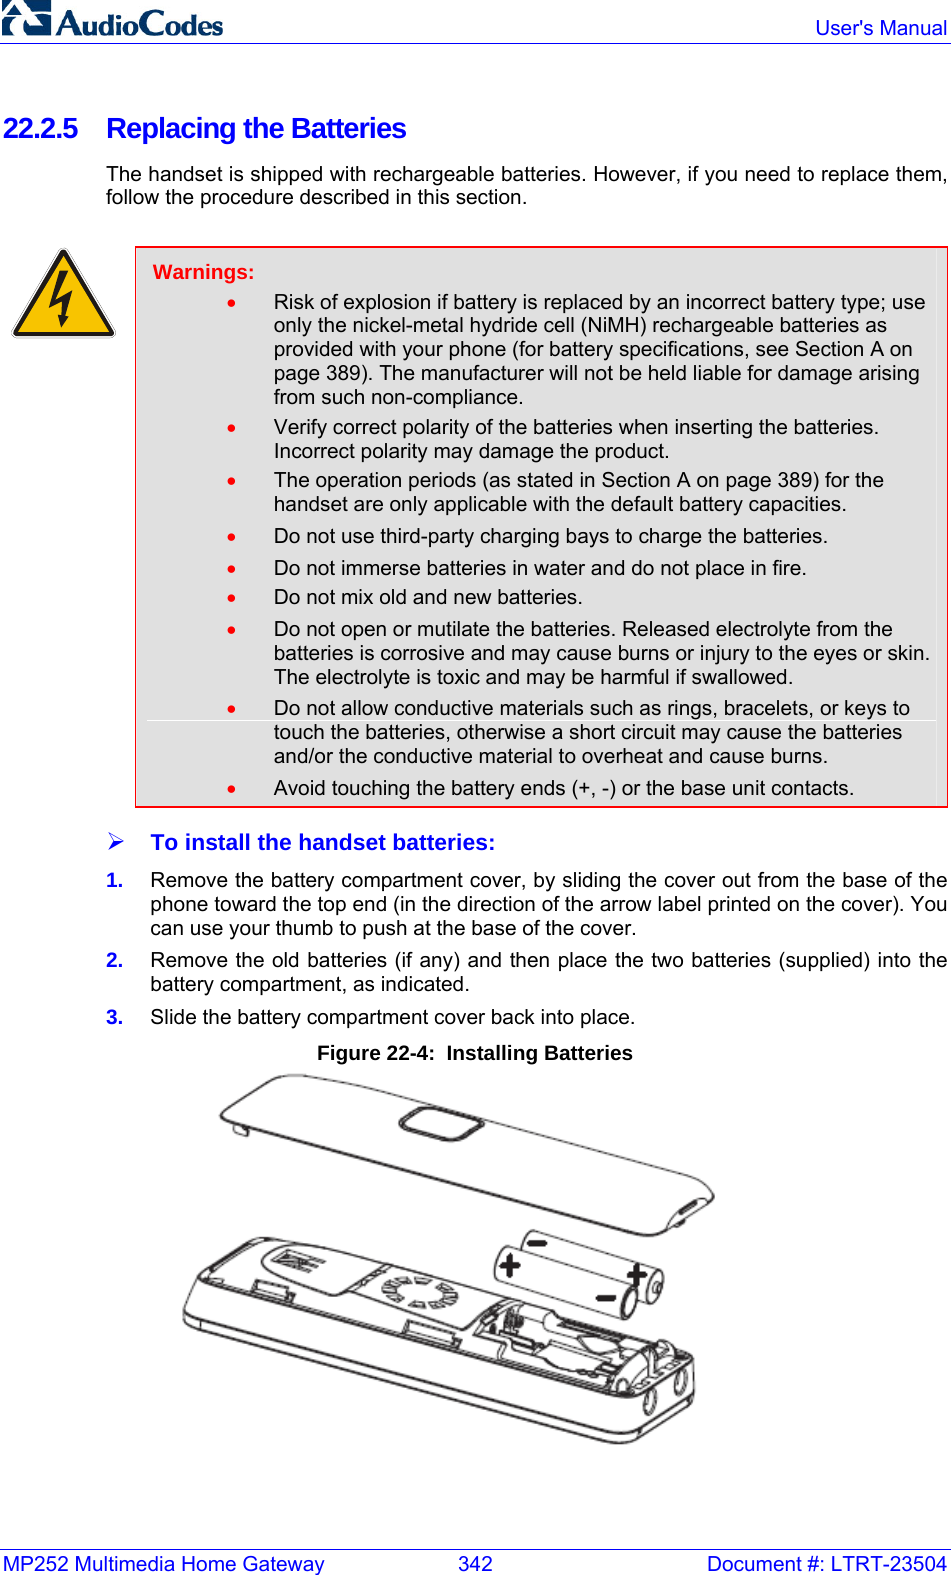 MP252 Multimedia Home Gateway  342  Document #: LTRT-23504  User&apos;s Manual  22.2.5  Replacing the Batteries The handset is shipped with rechargeable batteries. However, if you need to replace them, follow the procedure described in this section.   Warnings: • Risk of explosion if battery is replaced by an incorrect battery type; use only the nickel-metal hydride cell (NiMH) rechargeable batteries as provided with your phone (for battery specifications, see Section A on page 389). The manufacturer will not be held liable for damage arising from such non-compliance. • Verify correct polarity of the batteries when inserting the batteries. Incorrect polarity may damage the product. • The operation periods (as stated in Section A on page 389) for the handset are only applicable with the default battery capacities. • Do not use third-party charging bays to charge the batteries. • Do not immerse batteries in water and do not place in fire. • Do not mix old and new batteries. • Do not open or mutilate the batteries. Released electrolyte from the batteries is corrosive and may cause burns or injury to the eyes or skin. The electrolyte is toxic and may be harmful if swallowed. • Do not allow conductive materials such as rings, bracelets, or keys to touch the batteries, otherwise a short circuit may cause the batteries and/or the conductive material to overheat and cause burns. • Avoid touching the battery ends (+, -) or the base unit contacts. ¾ To install the handset batteries: 1.  Remove the battery compartment cover, by sliding the cover out from the base of the phone toward the top end (in the direction of the arrow label printed on the cover). You can use your thumb to push at the base of the cover. 2.  Remove the old batteries (if any) and then place the two batteries (supplied) into the battery compartment, as indicated. 3.  Slide the battery compartment cover back into place. Figure 22-4:  Installing Batteries  